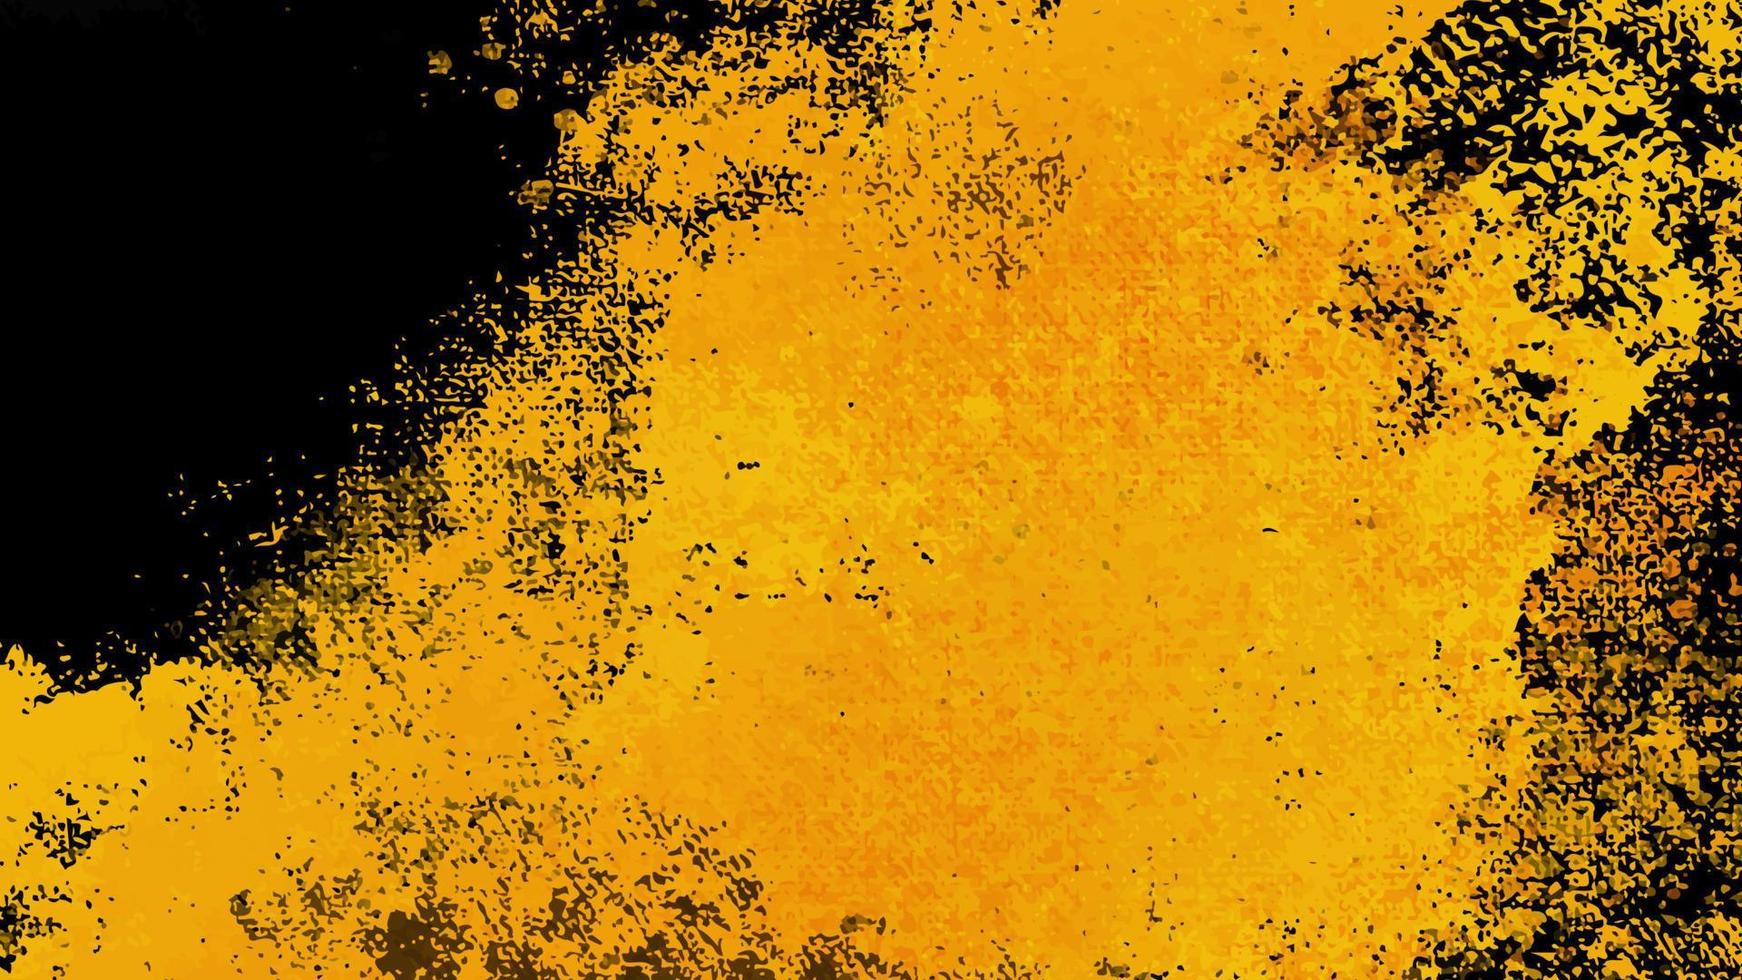 Black and Yellow abstract background with grunge texture. vector